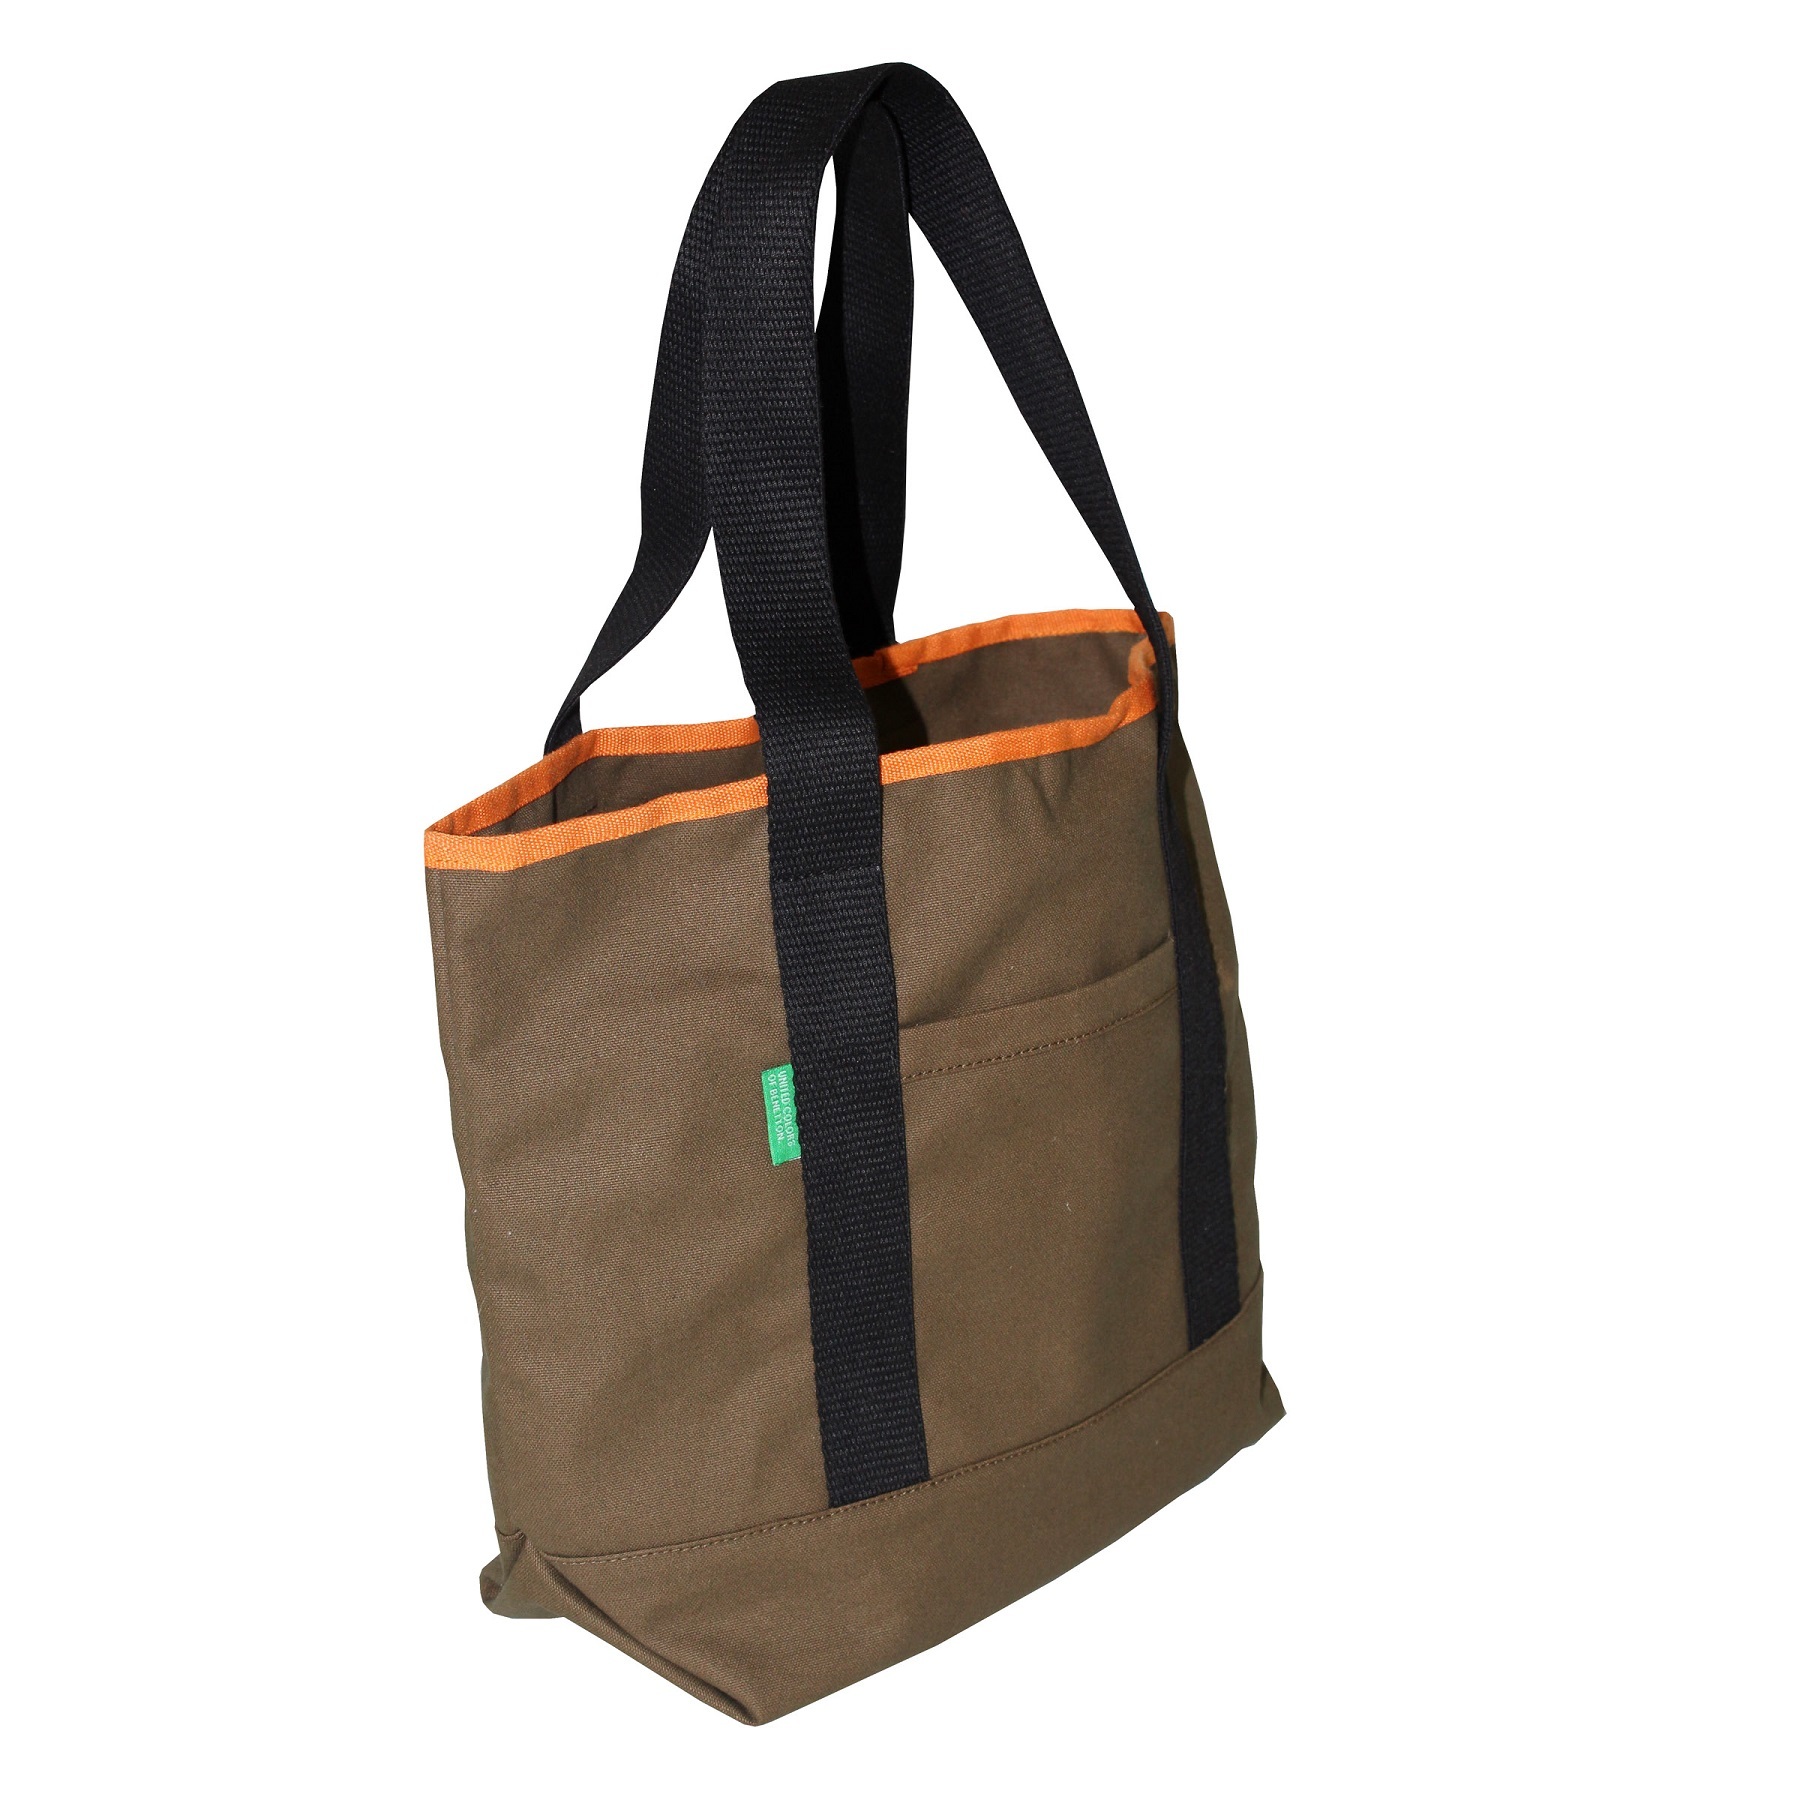 Canvas Shopping Bag With Cotton Web Handle